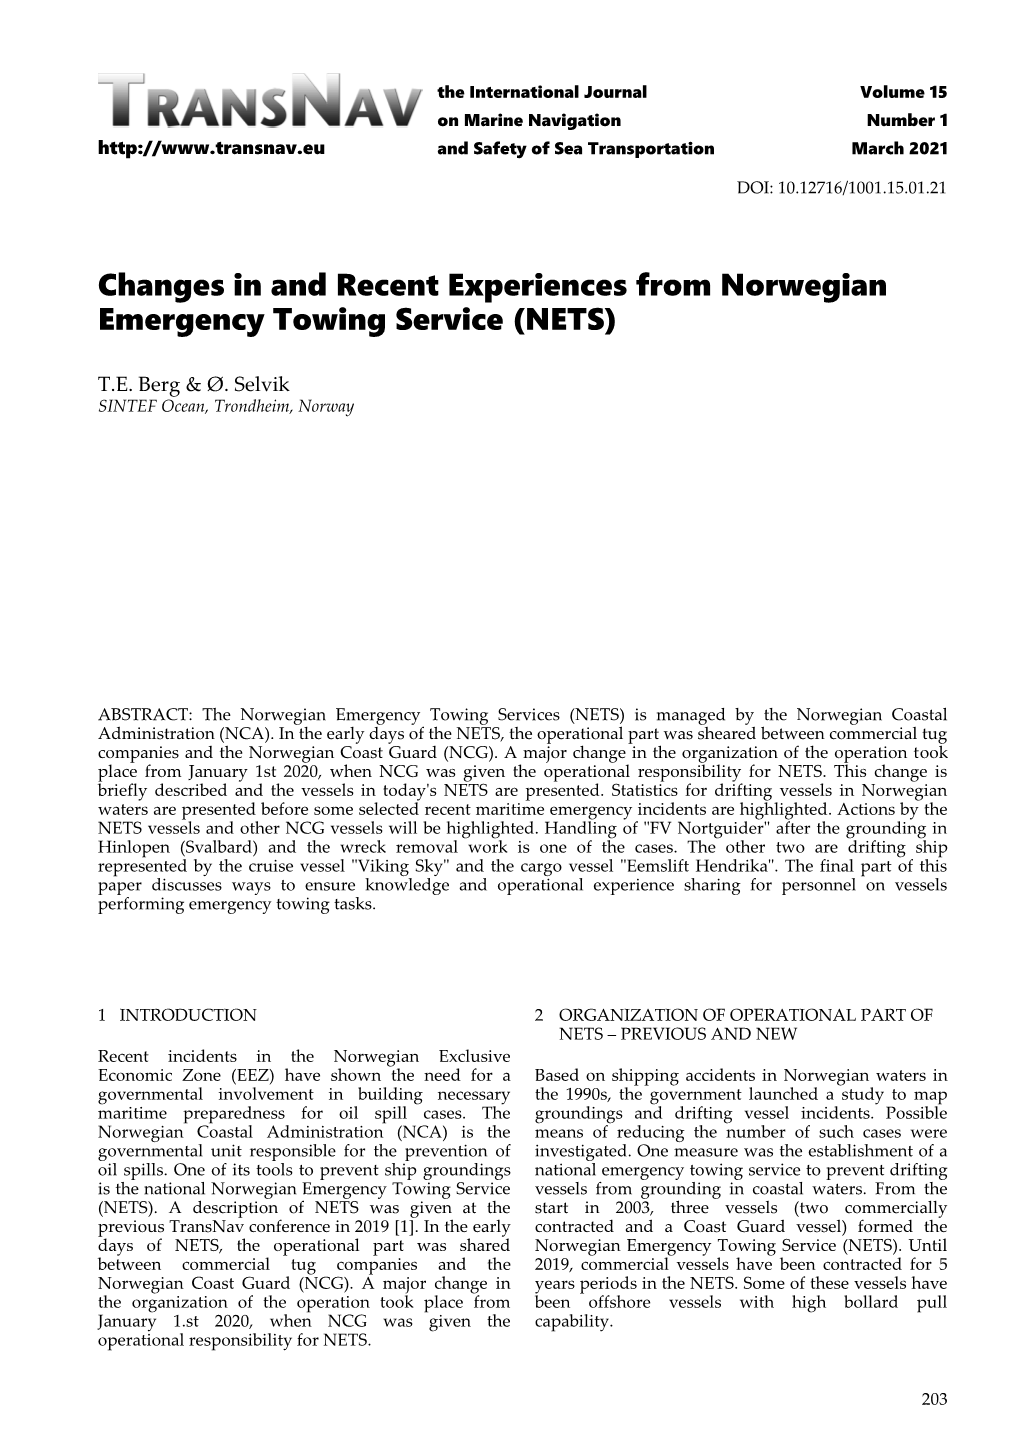 Changes in and Recent Experiences from Norwegian Emergency Towing Service (NETS)